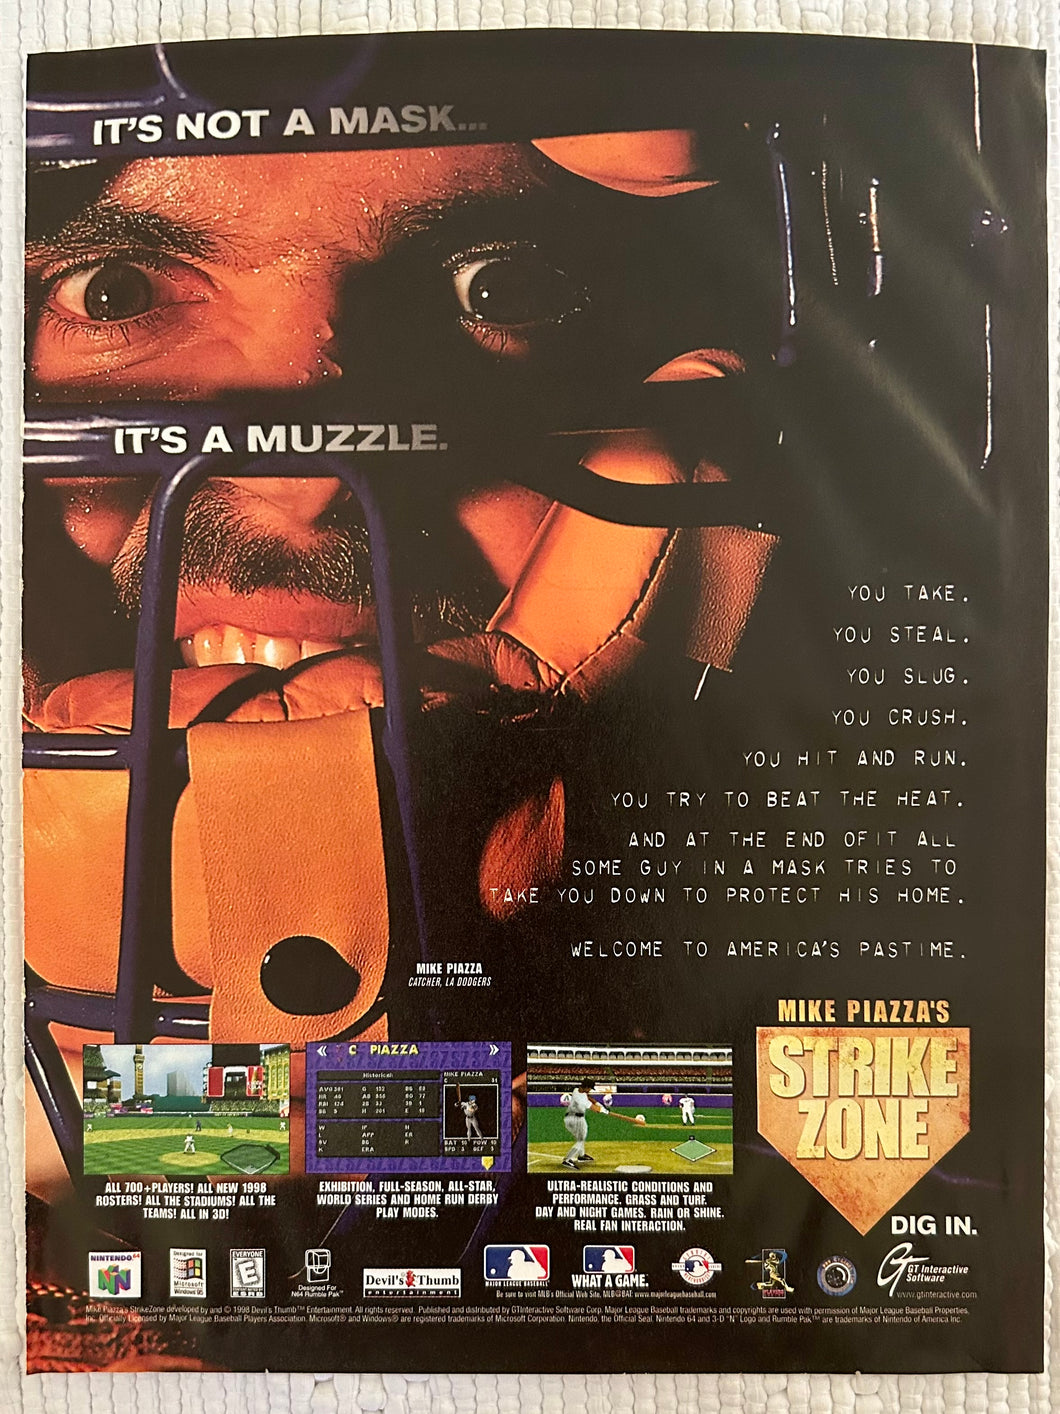 Mike Piazza’s Strike Zone - N64 PC - Original Vintage Advertisement - Print Ads - Laminated A4 Poster